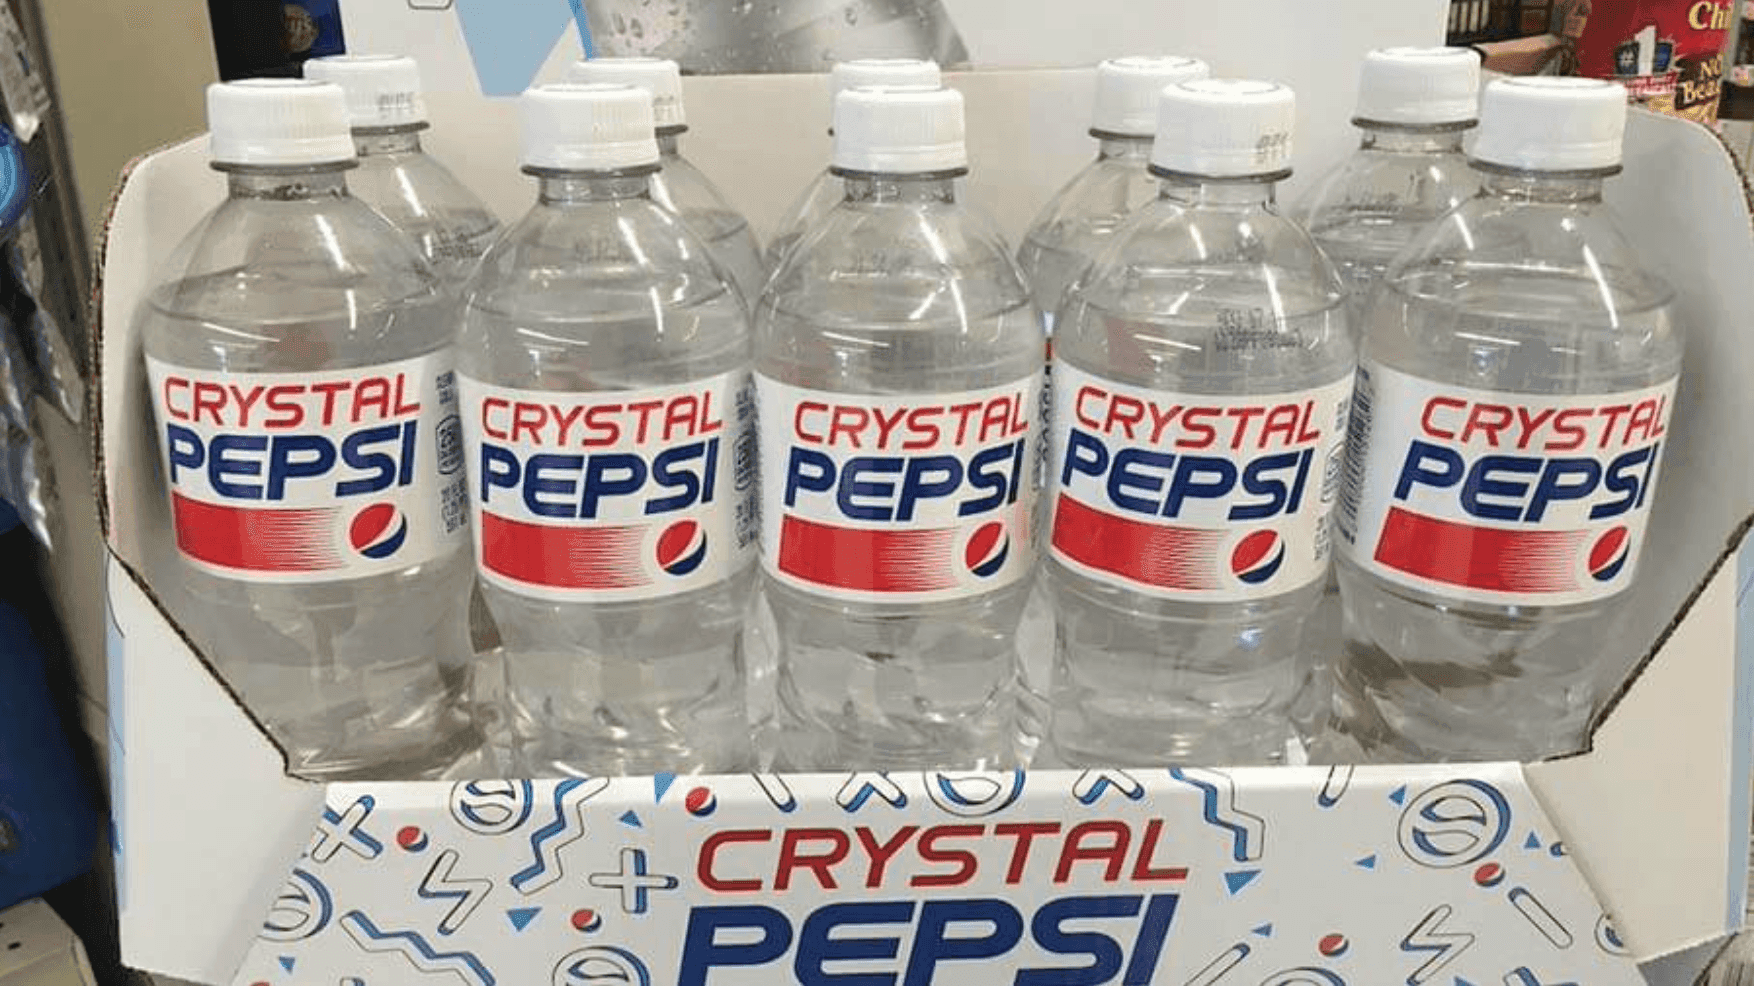 Image of a case of Crystal Pepsi